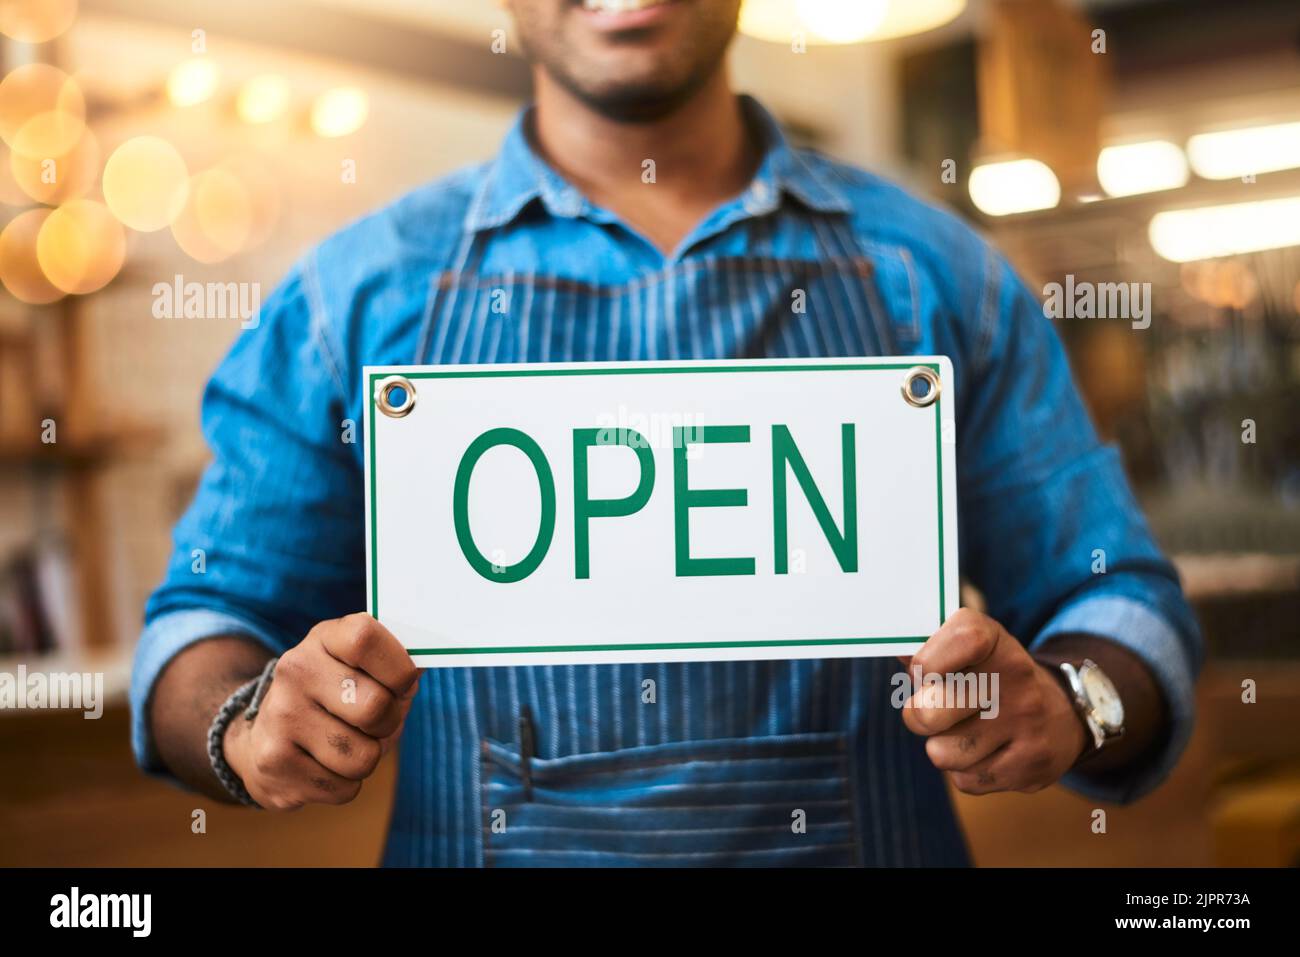 Open for business. Closeup shot of an unrecognizable man holding up an open sign in his store. Stock Photo